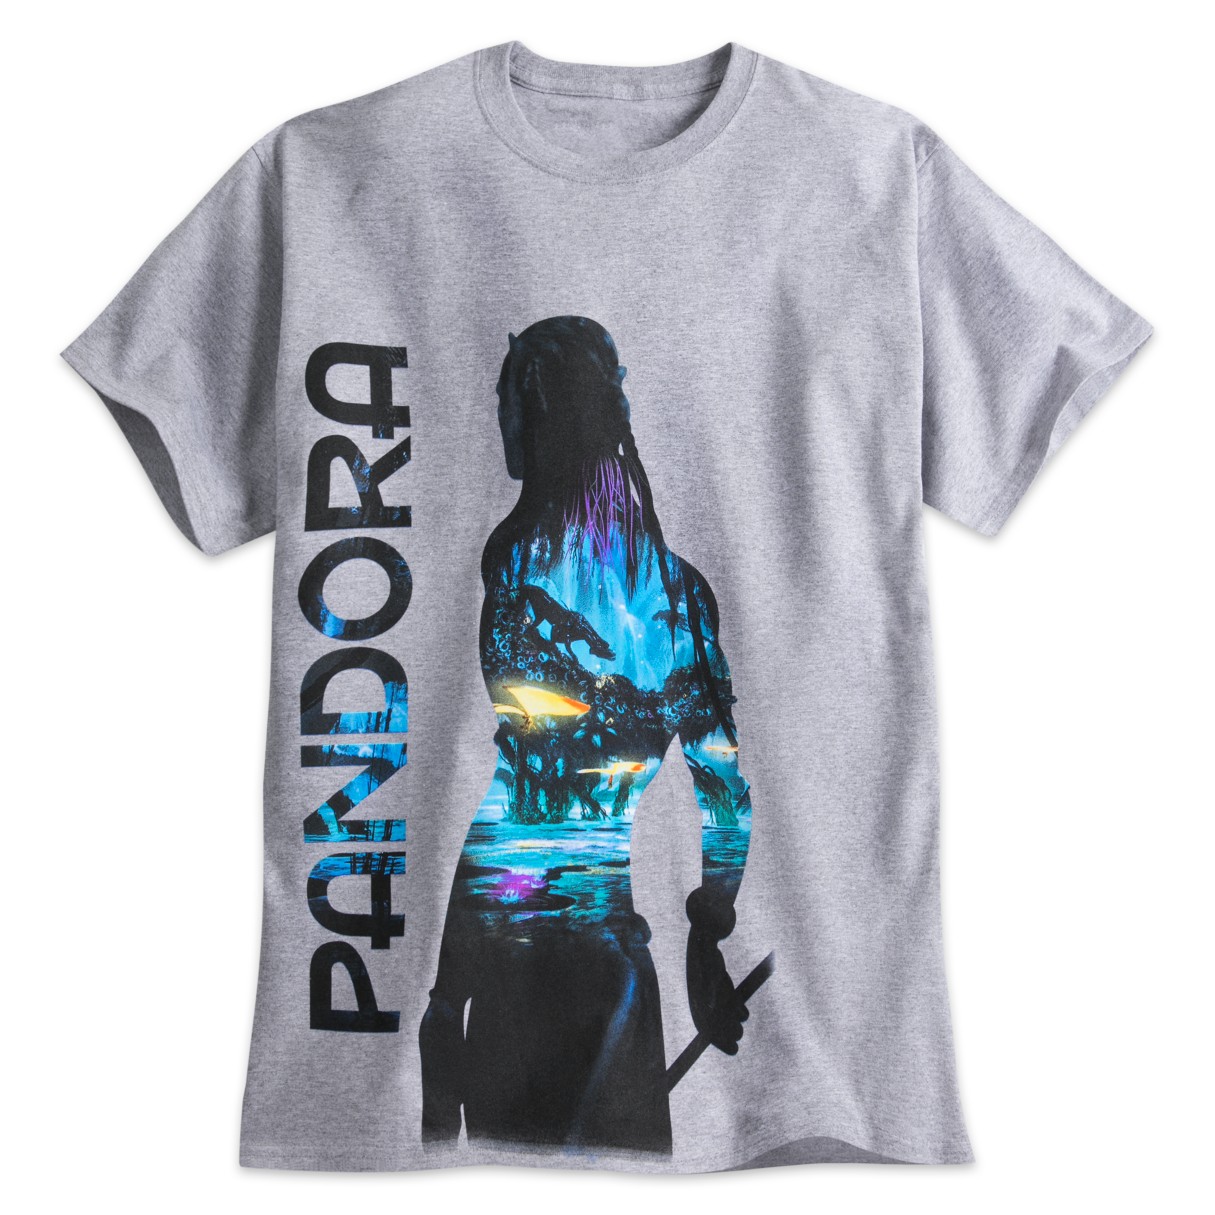 Pandora – The World of Avatar Na'vi Tee for Adults